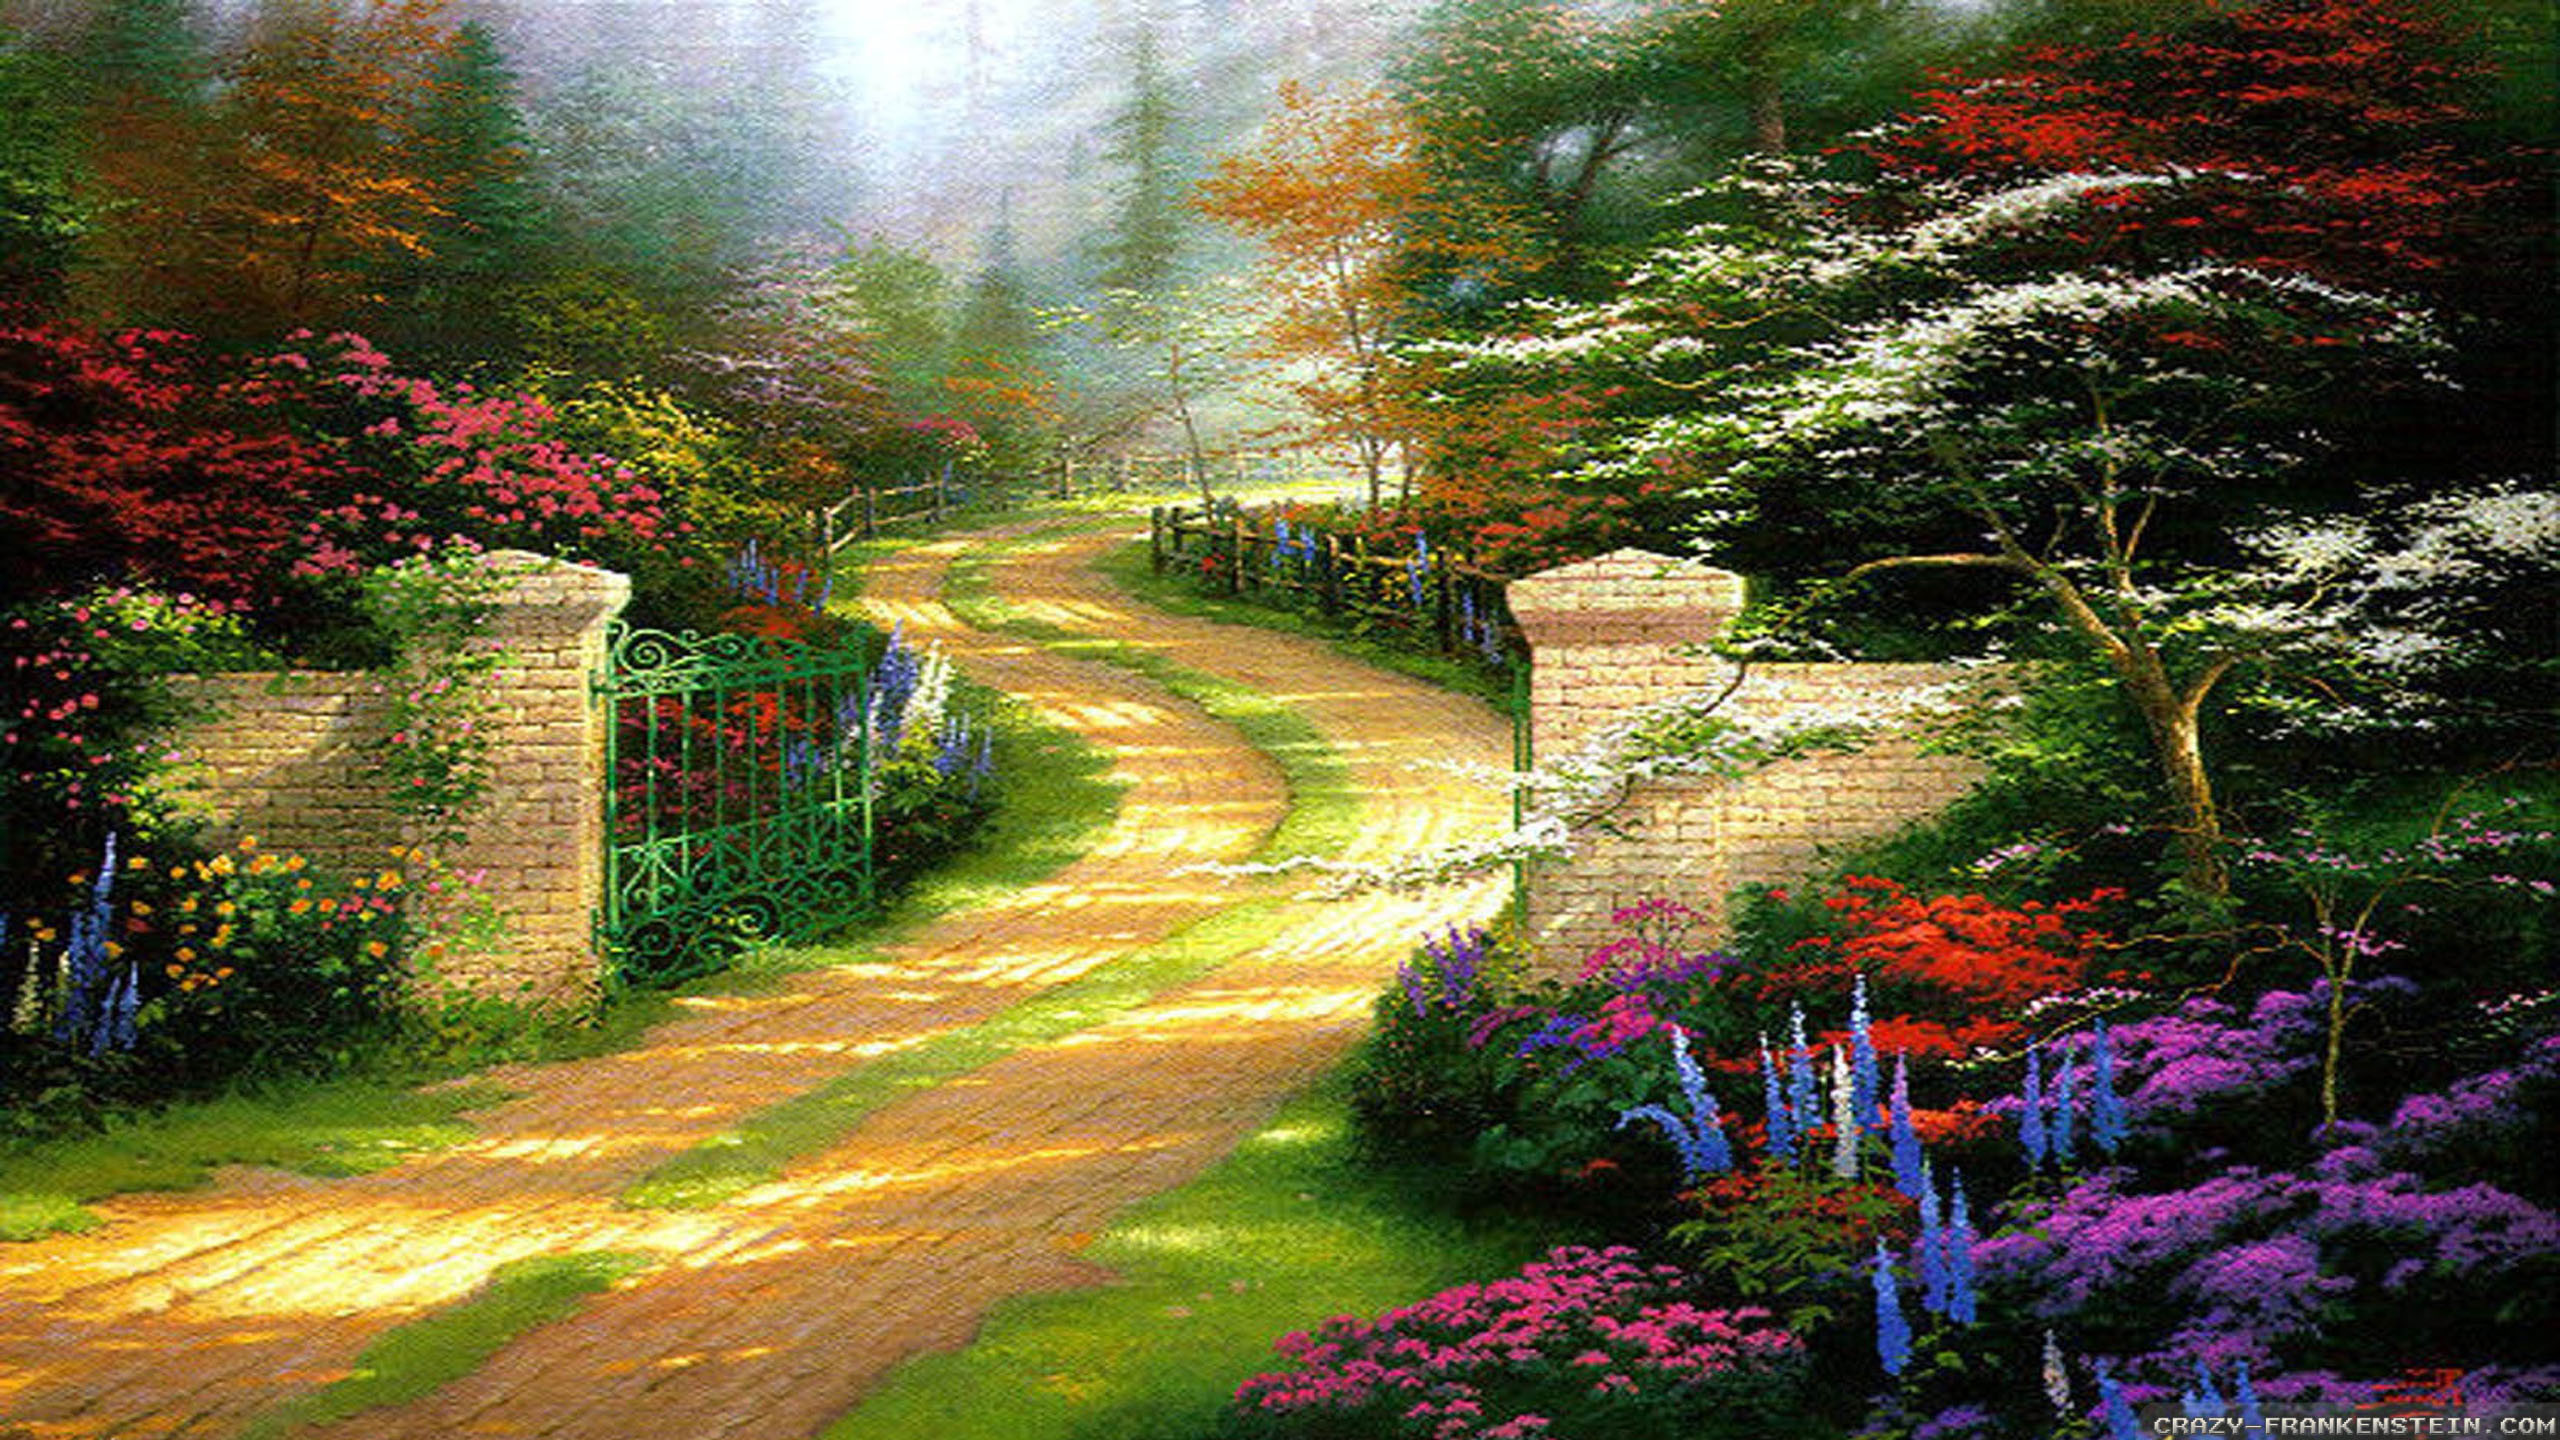 2560x1440 Wallpaper: Spring gate Spring nature wallpapers. Resolution: 1024x768 |  1280x1024 | 1600x1200. Widescreen Res: 1440x900 | 1680x1050 | 1920x1200